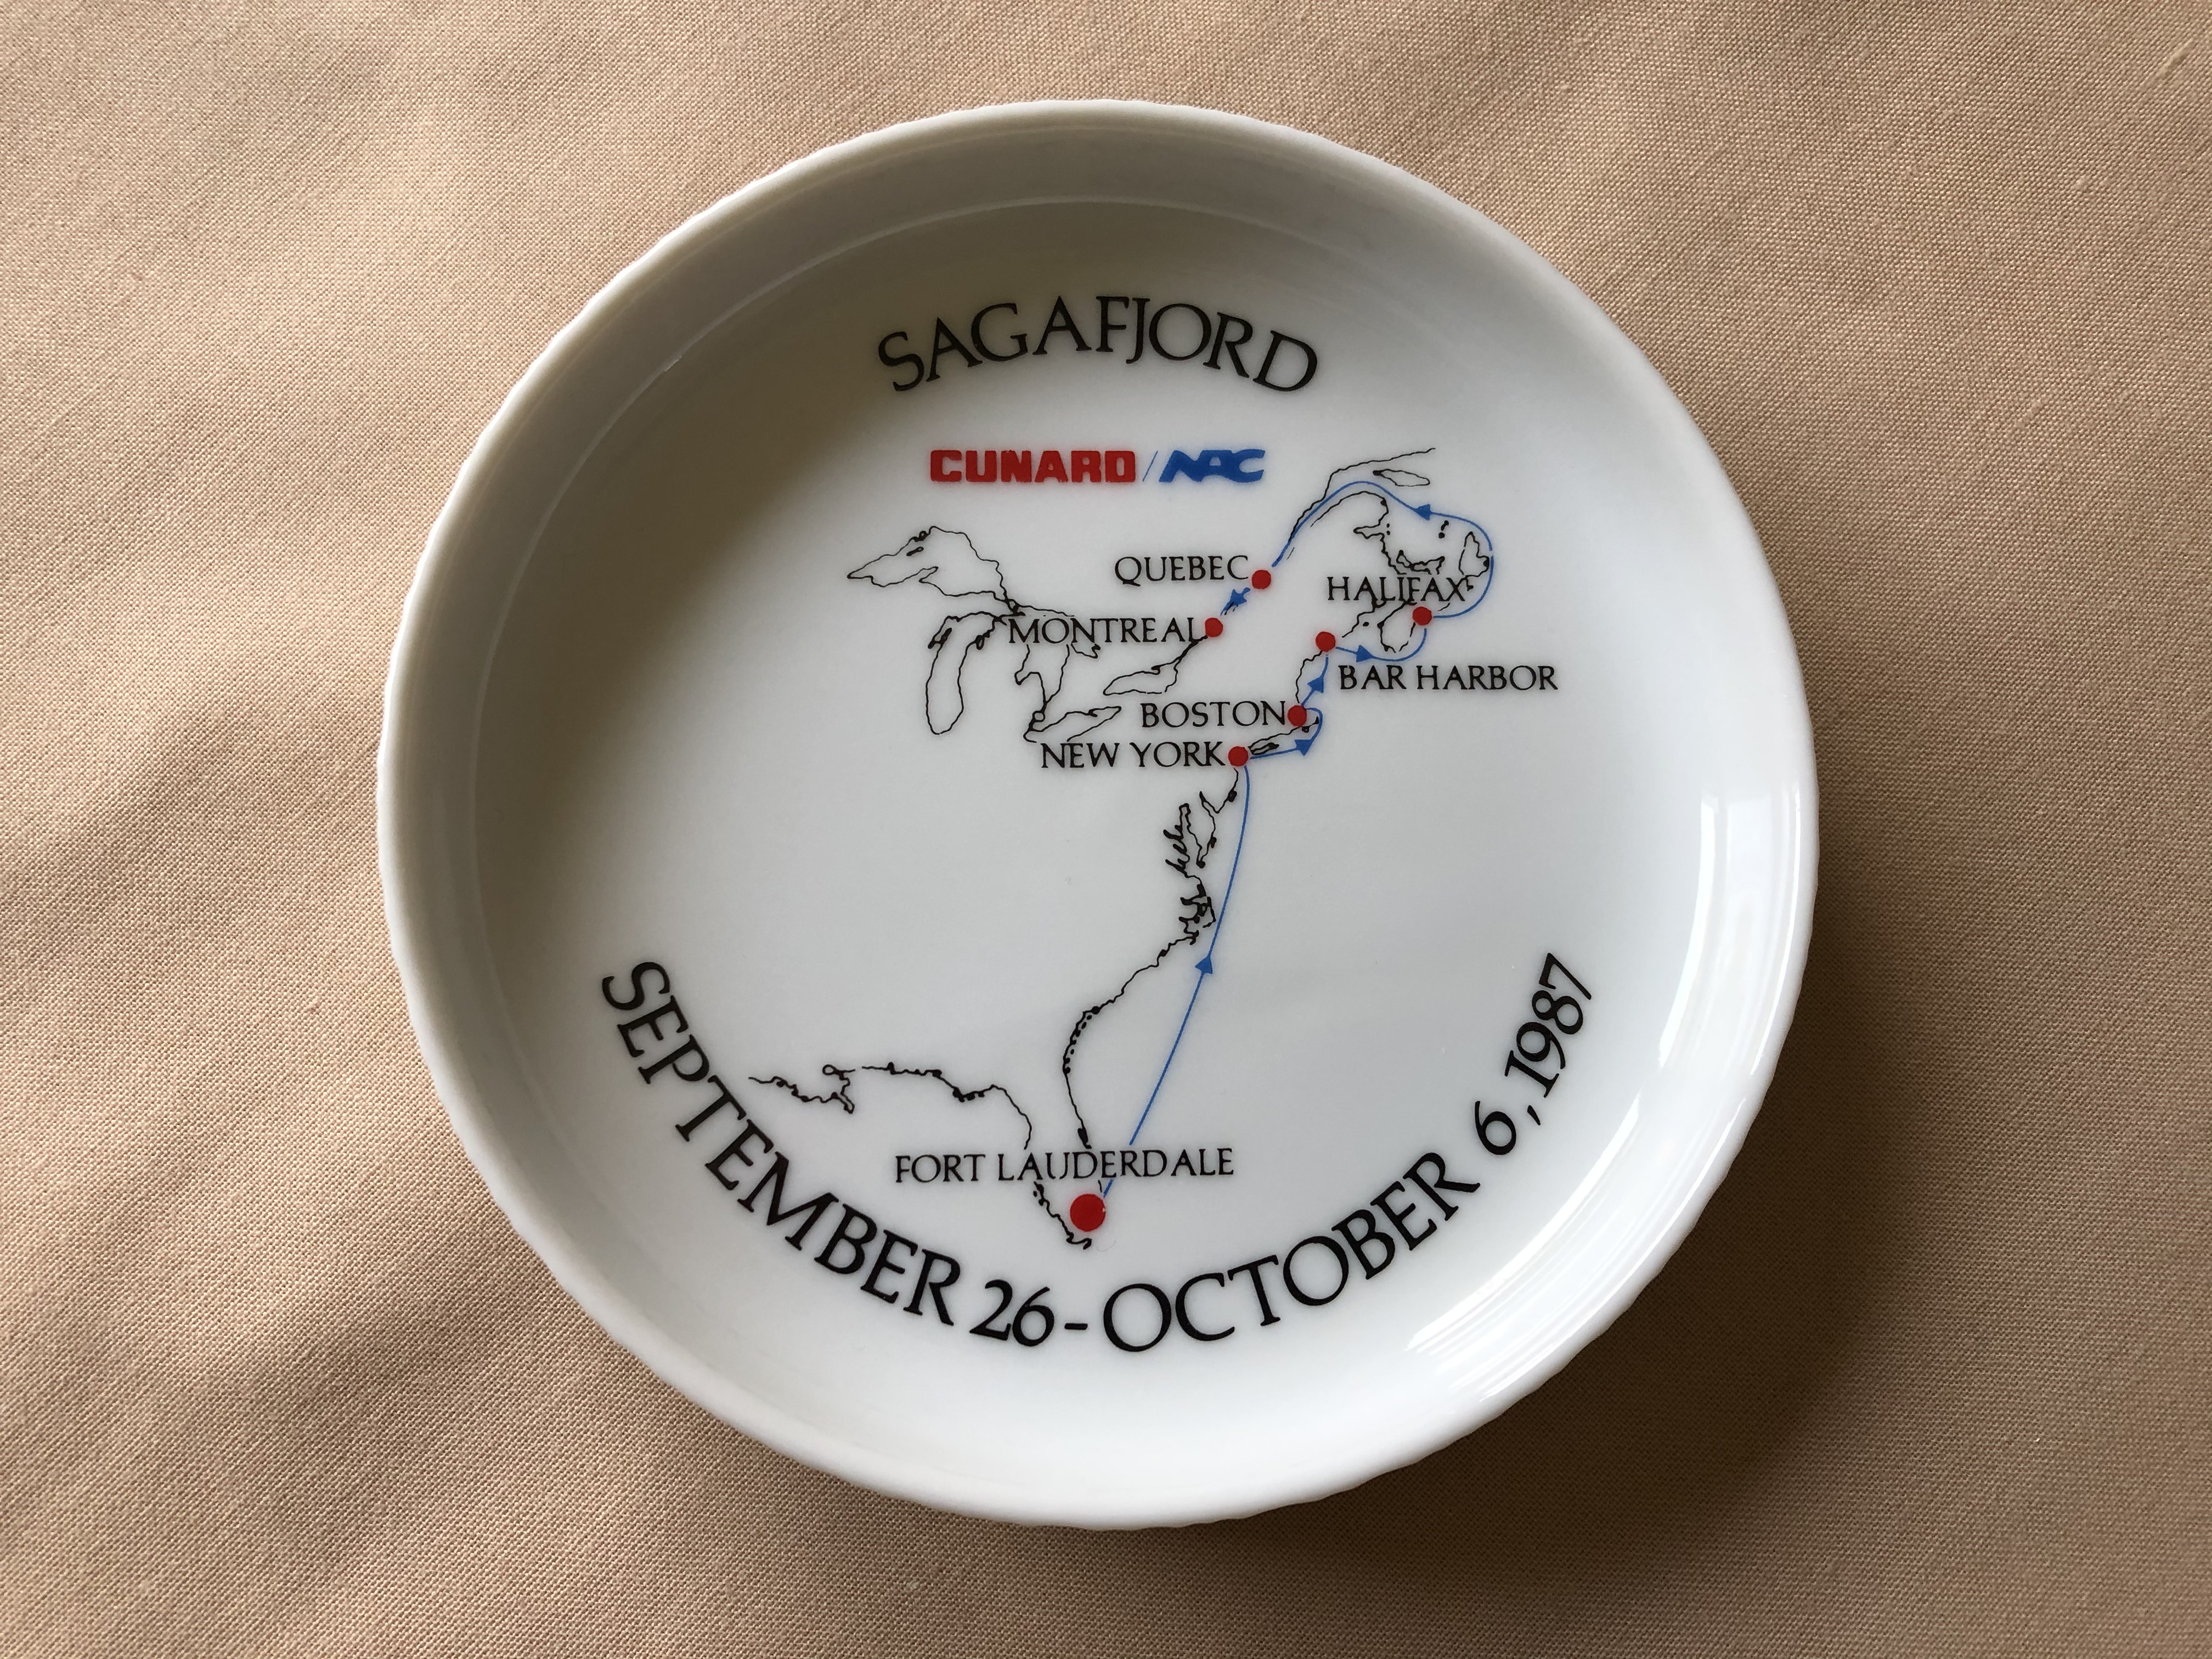 DECORATIVE CHINA PIN DISH FROM THE CUNARD LINE VESSEL THE MS SAGAFJORD   